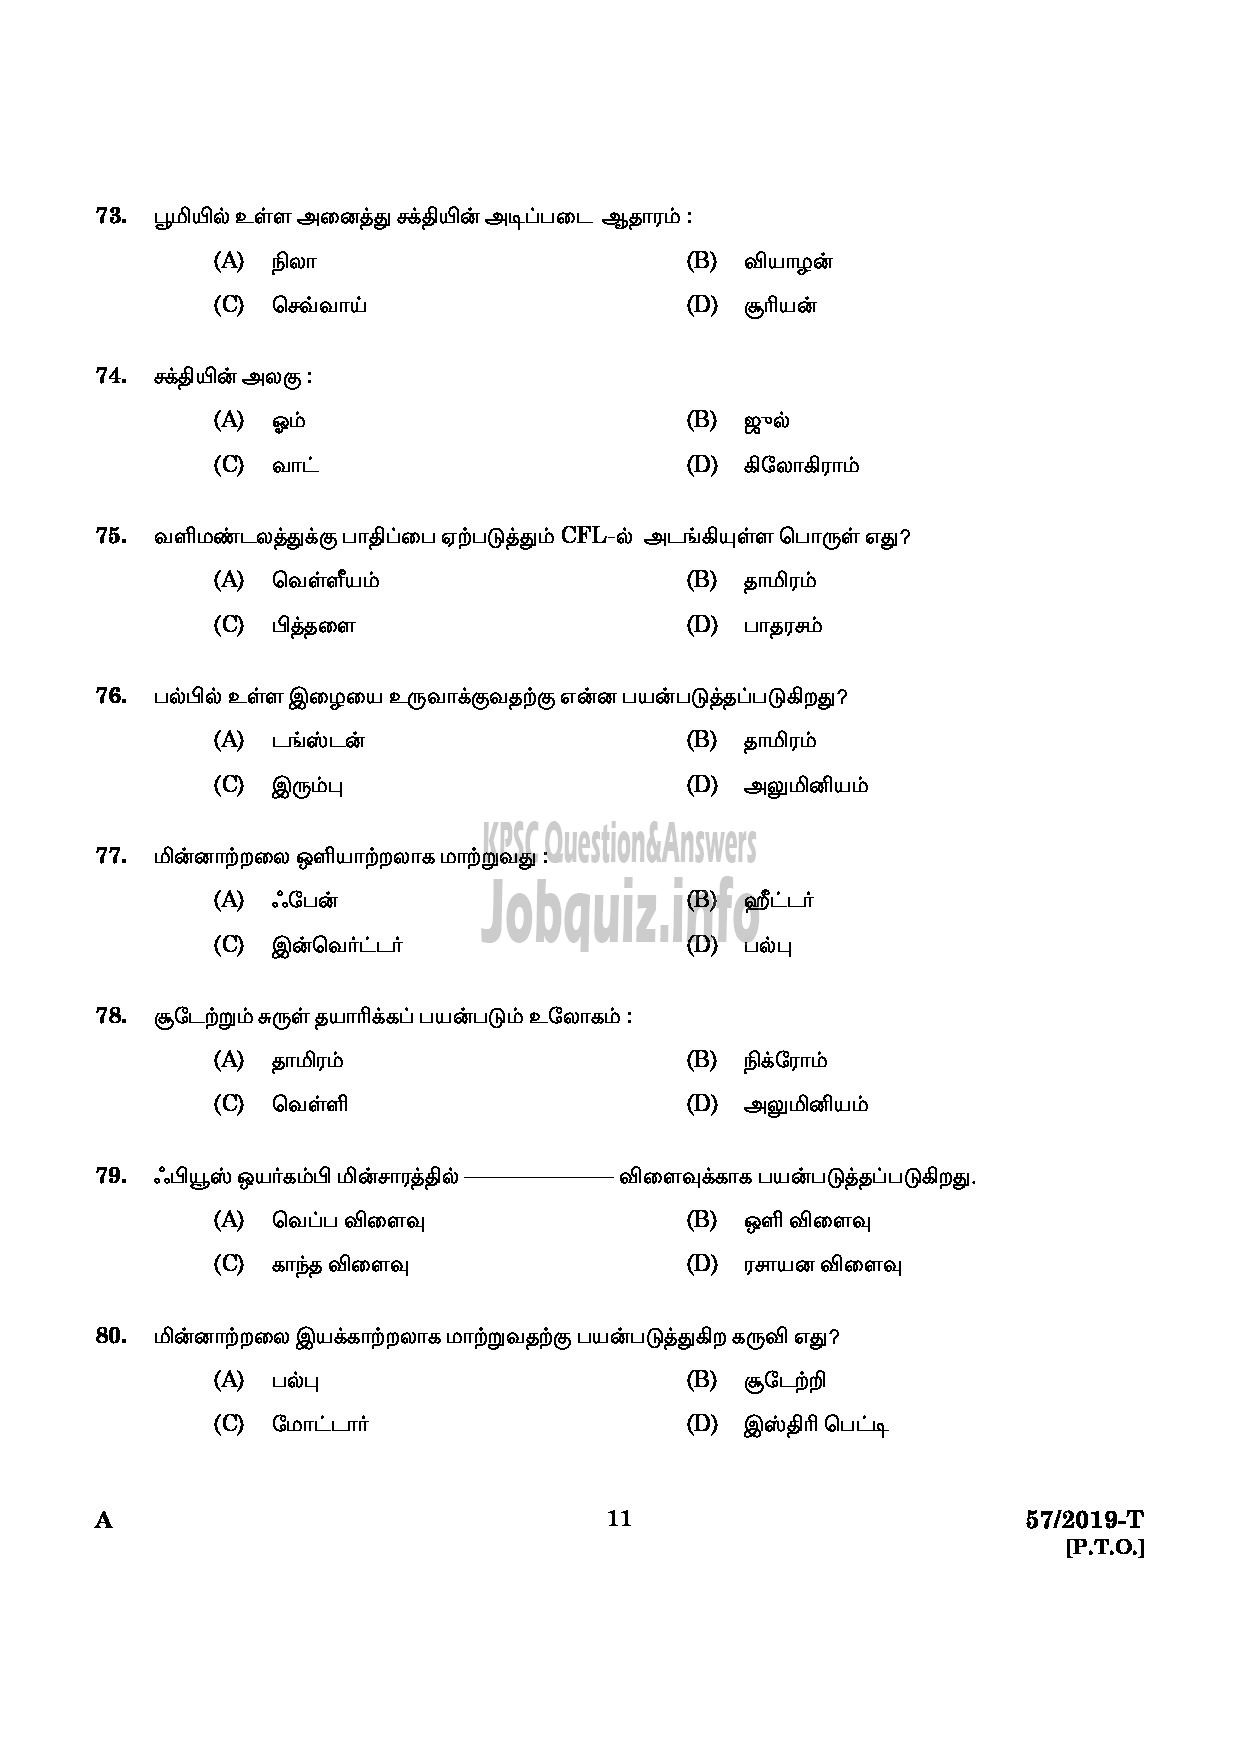 Kerala PSC Question Paper - 	POWER LAUNDRY ATTENDER MEDICAL EDUCATION TAMIL-9